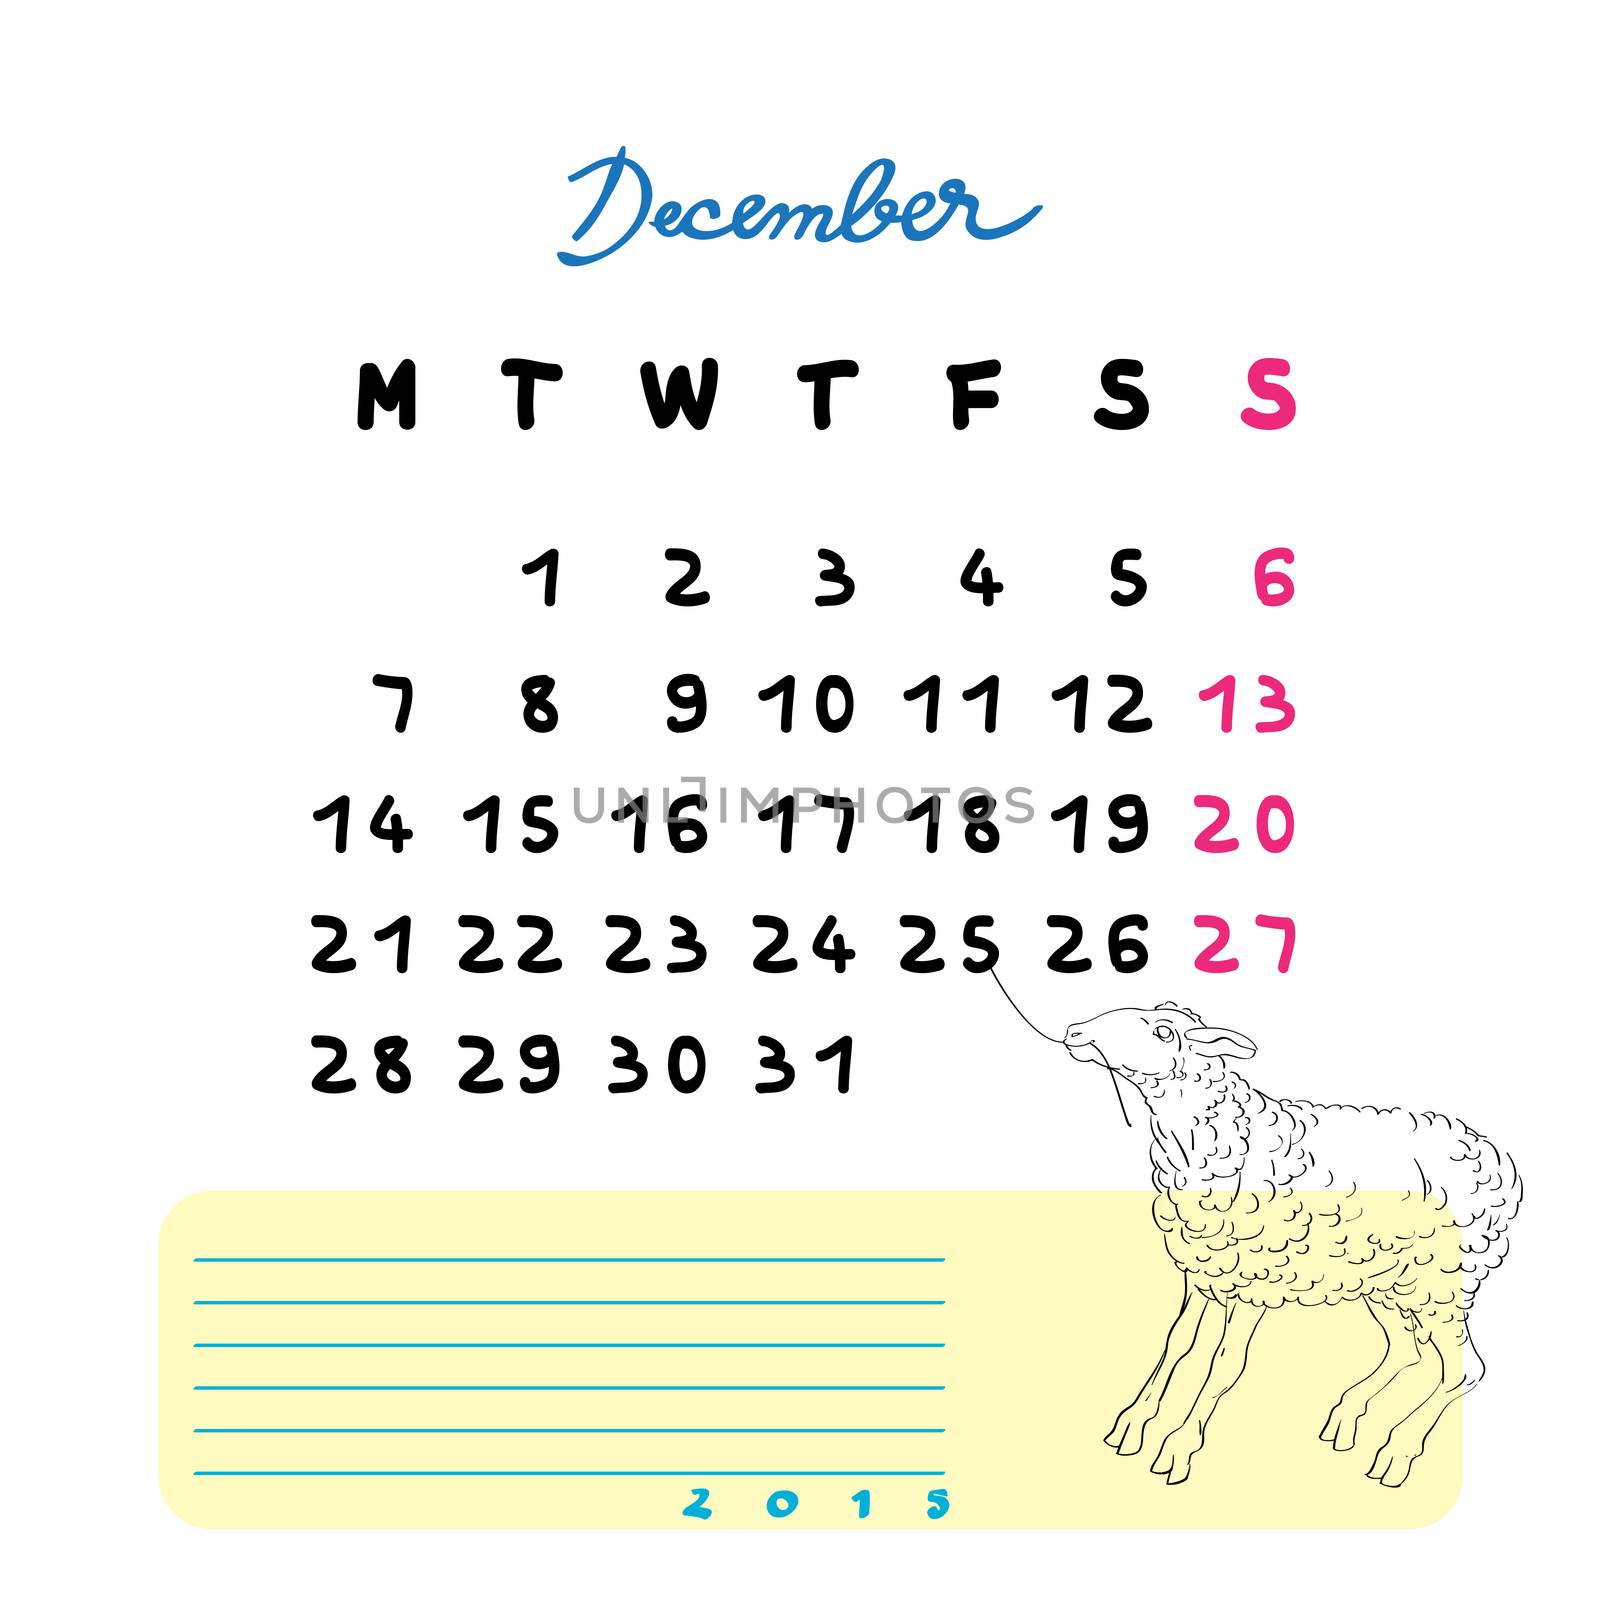 Calendar 2015 page illustration with sheep doodle and notes section over white, December